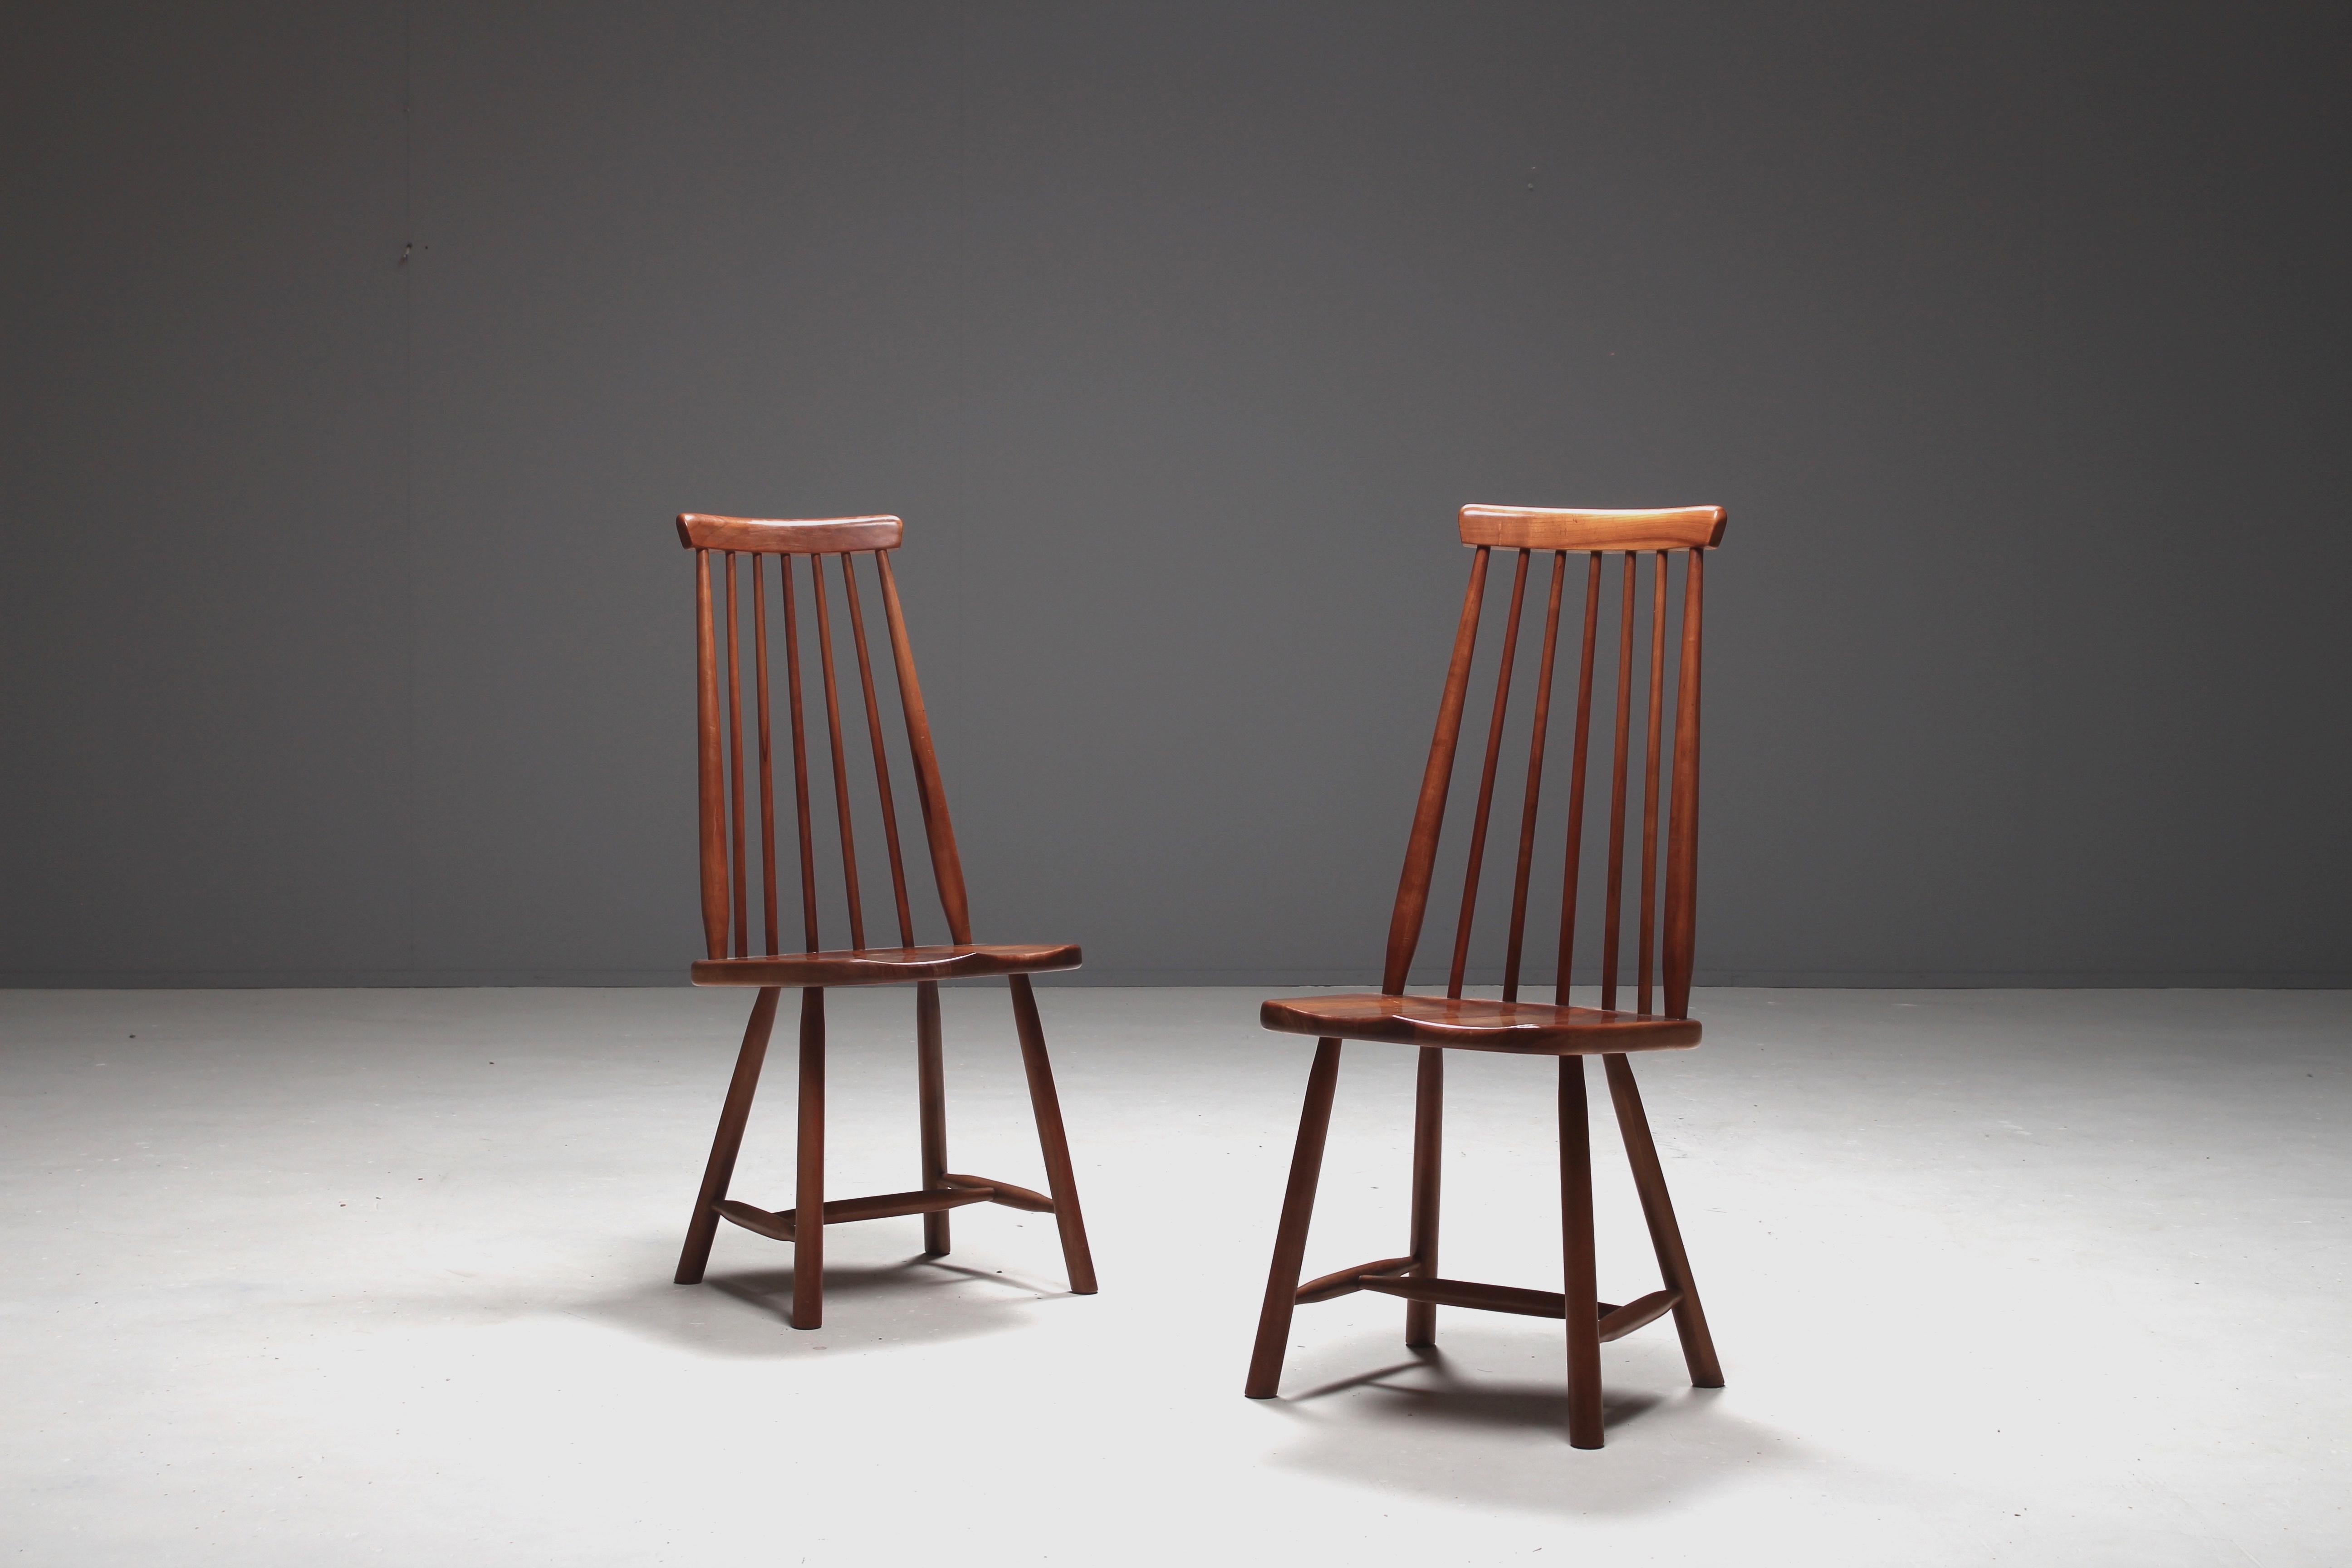 A wonderful pair of walnut chairs which we attribute to the famous Finnish furniture designer Ilmari Tapiovaara. Produced in the 1960s.
The chairs strongly refer to the well known 'Mademoiselle' chair by Tapiovaara.
The seats of these chairs are